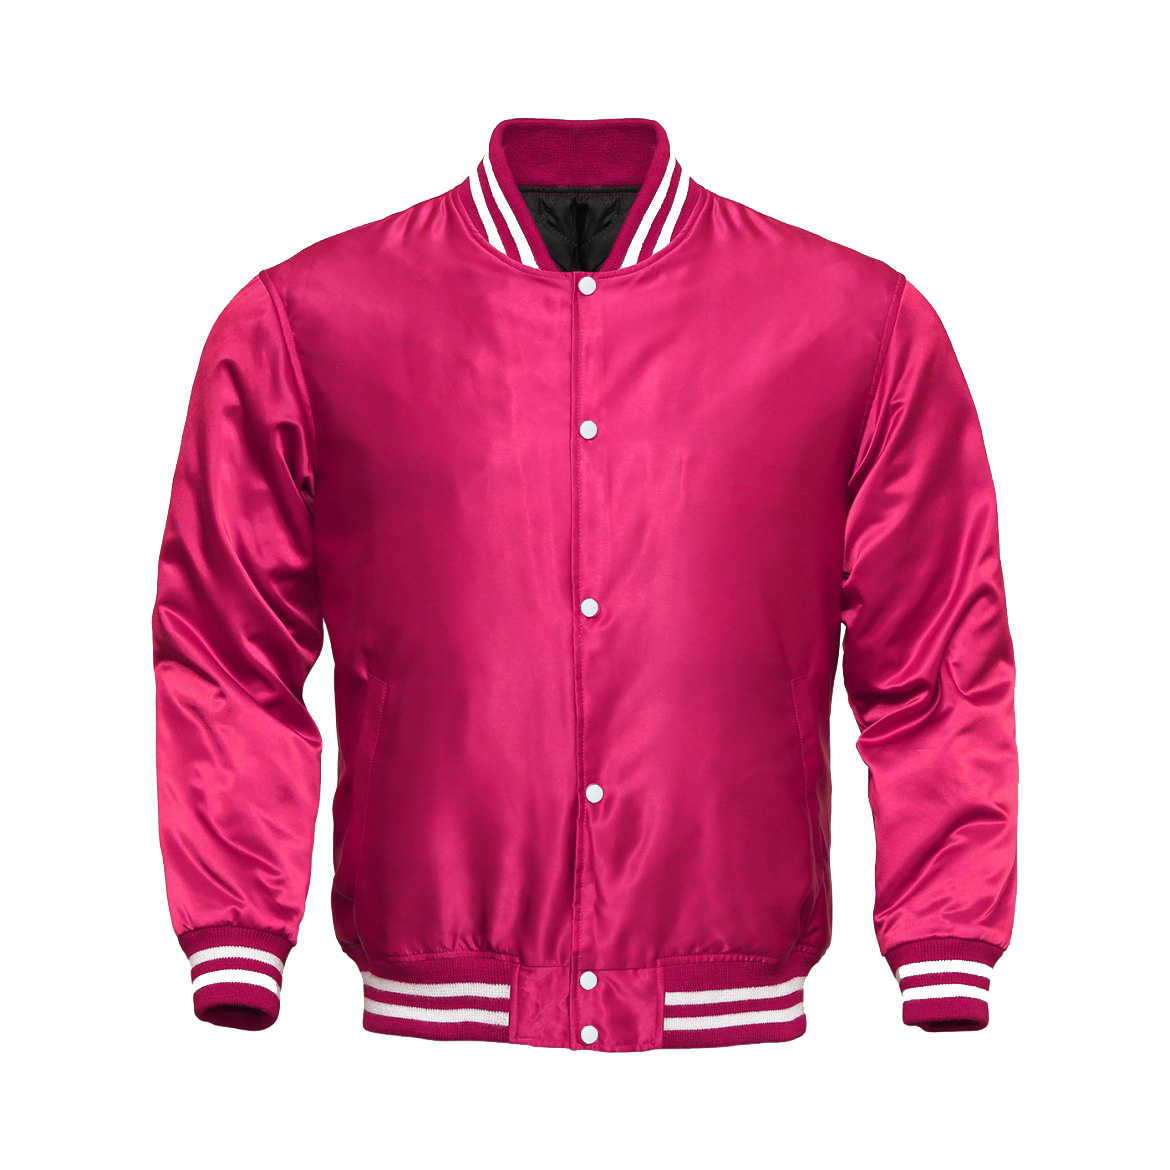 CAMPUS SUTRA Full Sleeve Solid Women Jacket - Buy CAMPUS SUTRA Full Sleeve  Solid Women Jacket Online at Best Prices in India | Flipkart.com